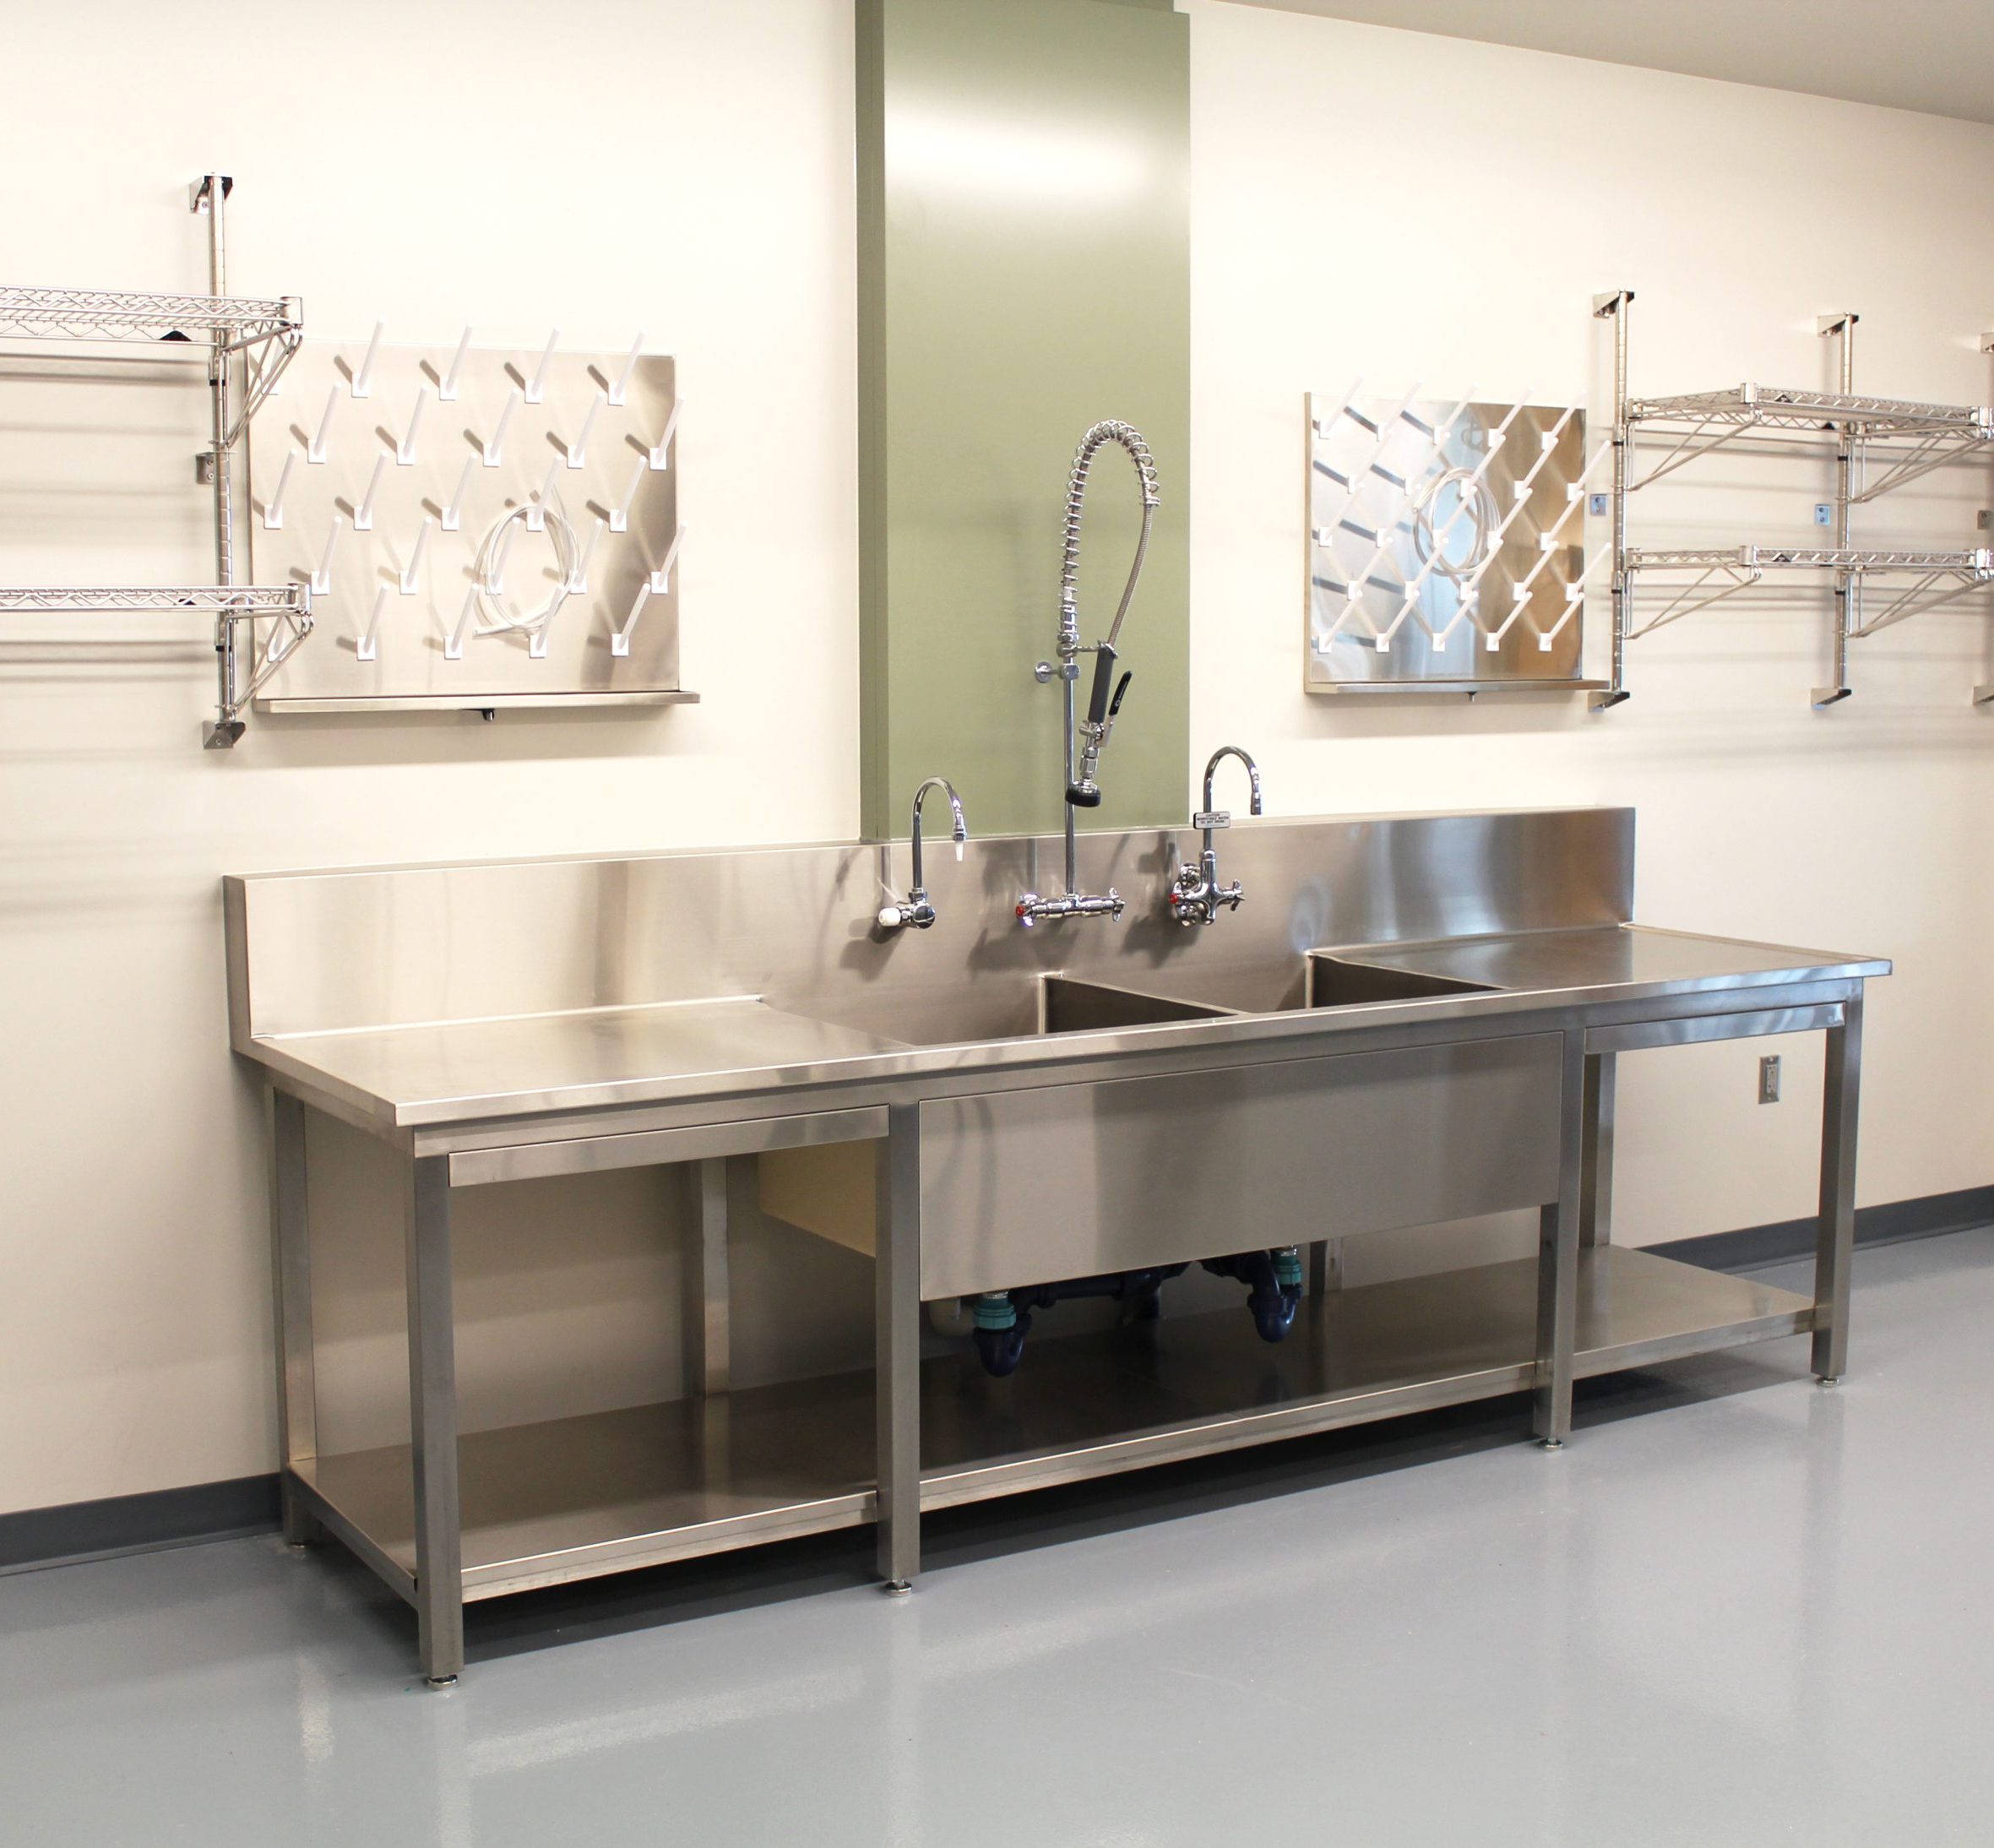 Stainless steel scullery sink